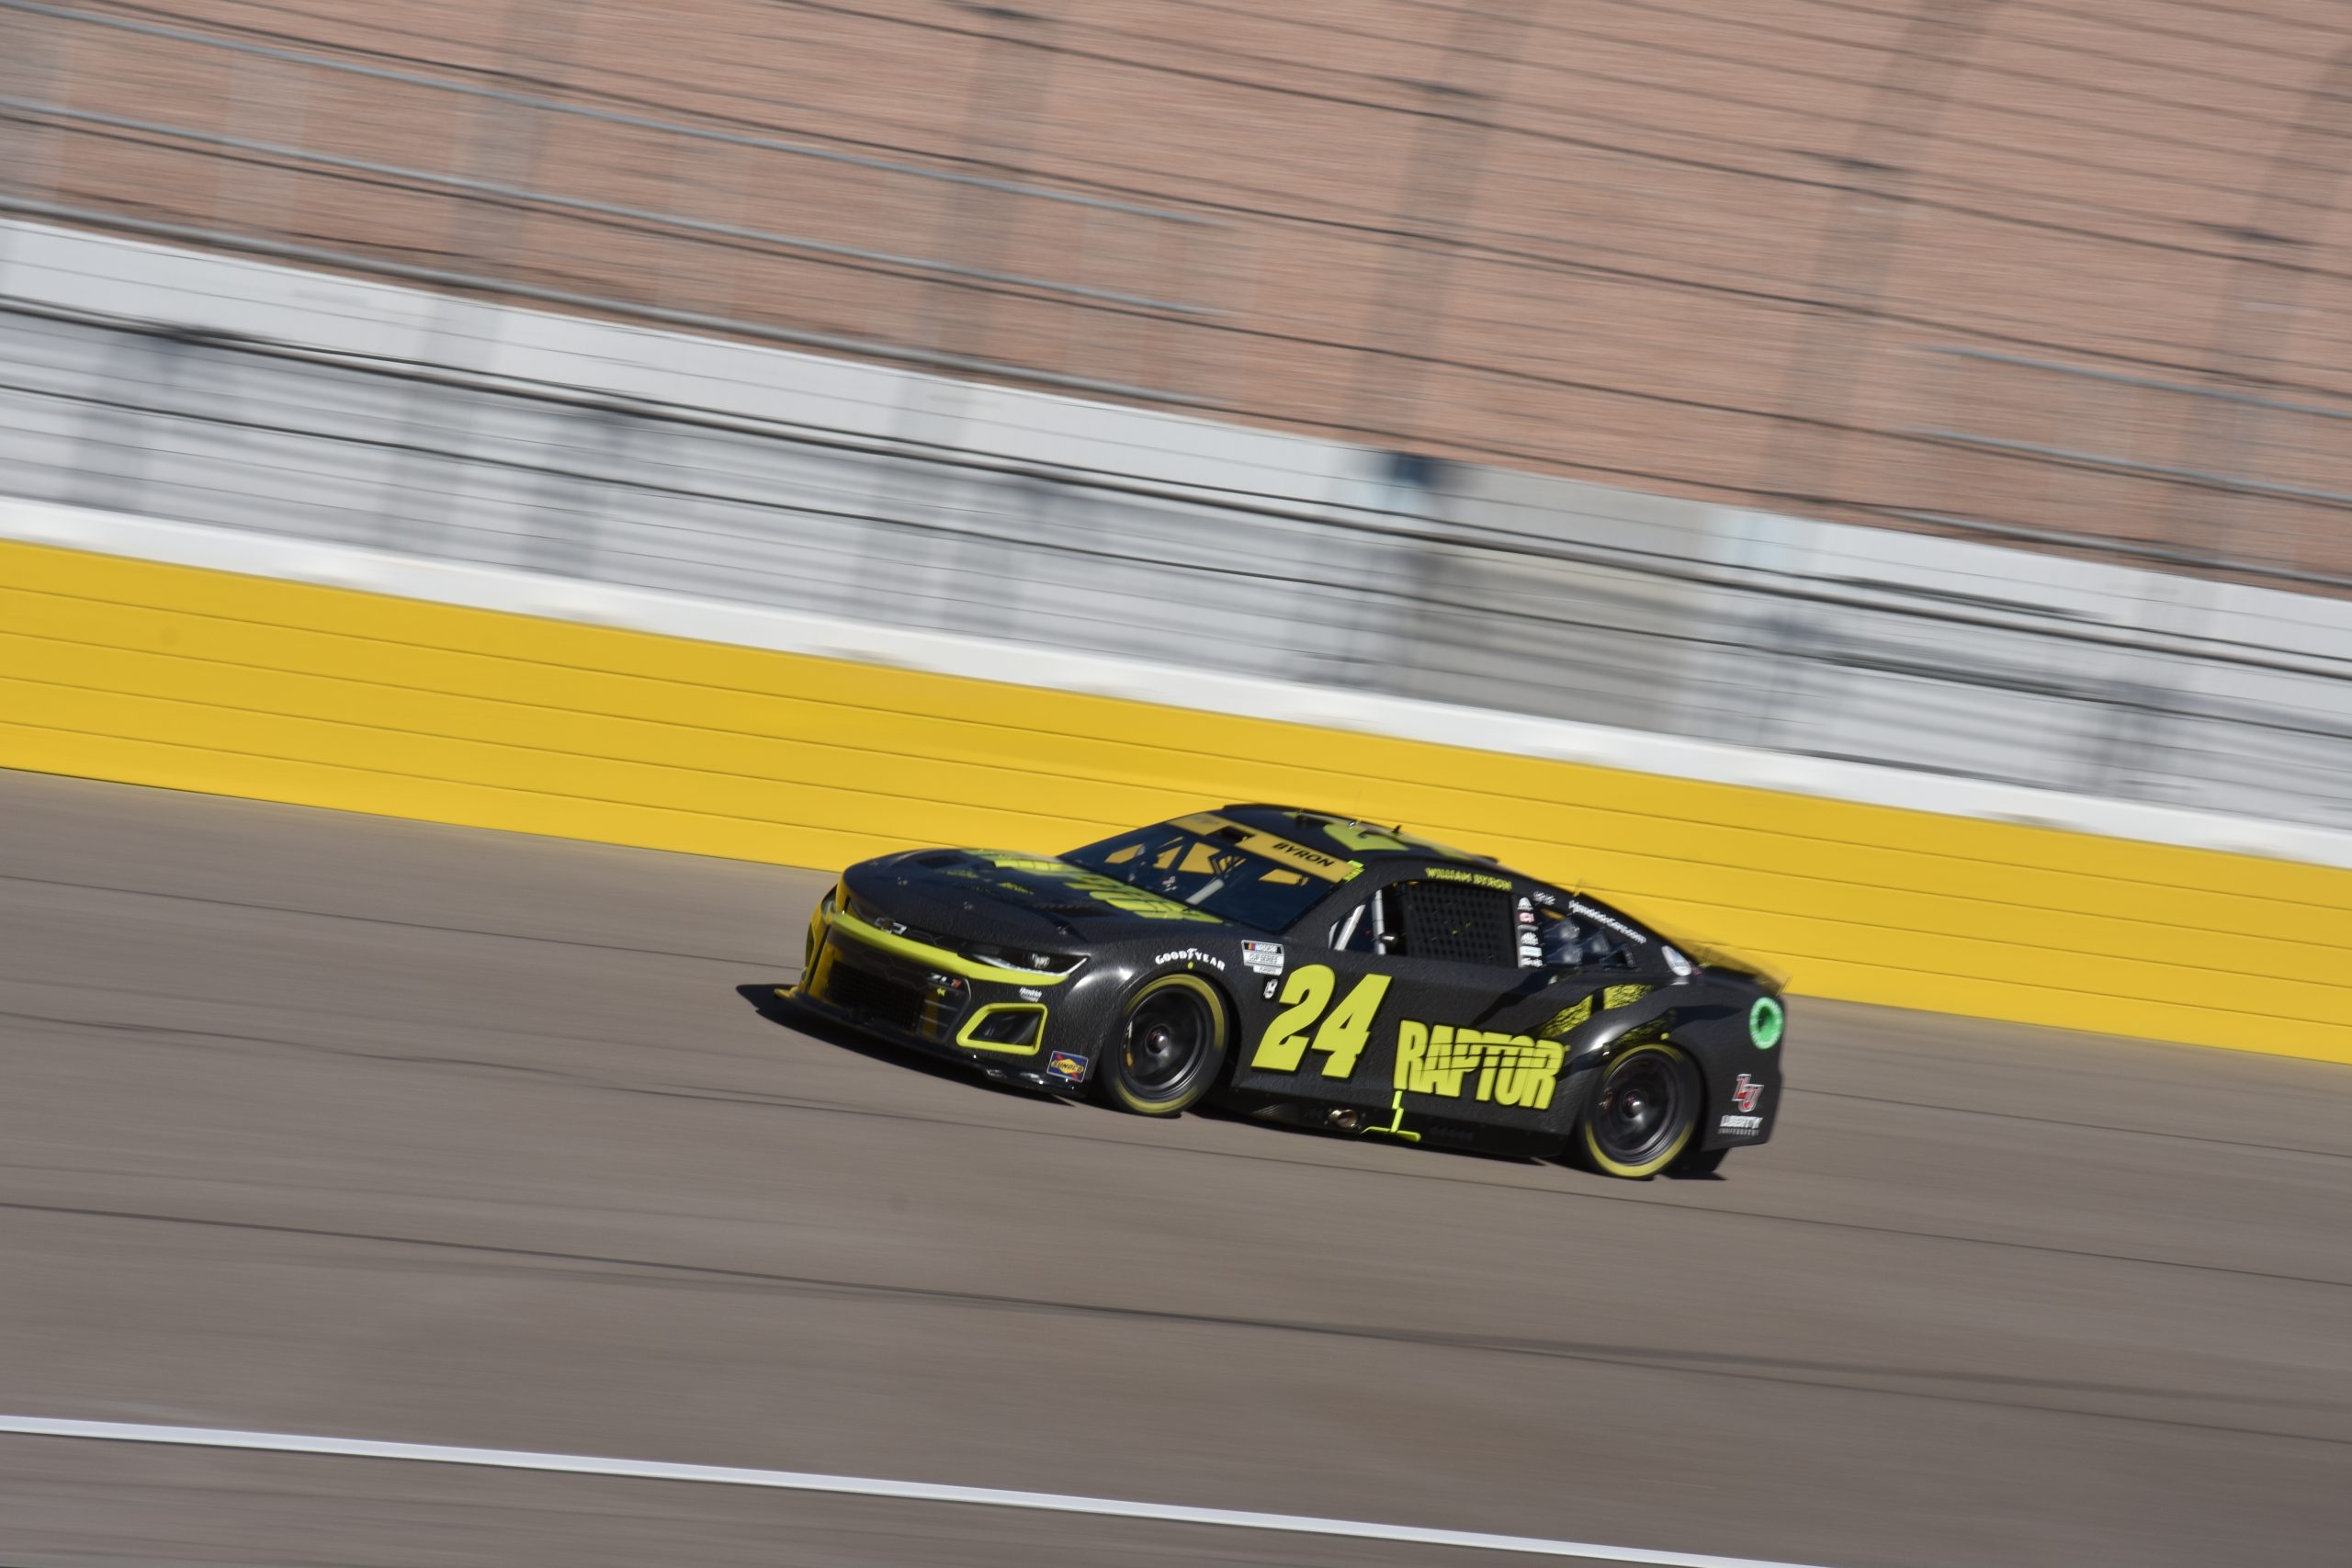 Based on Byron's results in the Playoffs races at Kansas and Texas, it could be a memorable race day in the Sin City. (Photo: Landen Ciardullo | The Podium Finish)